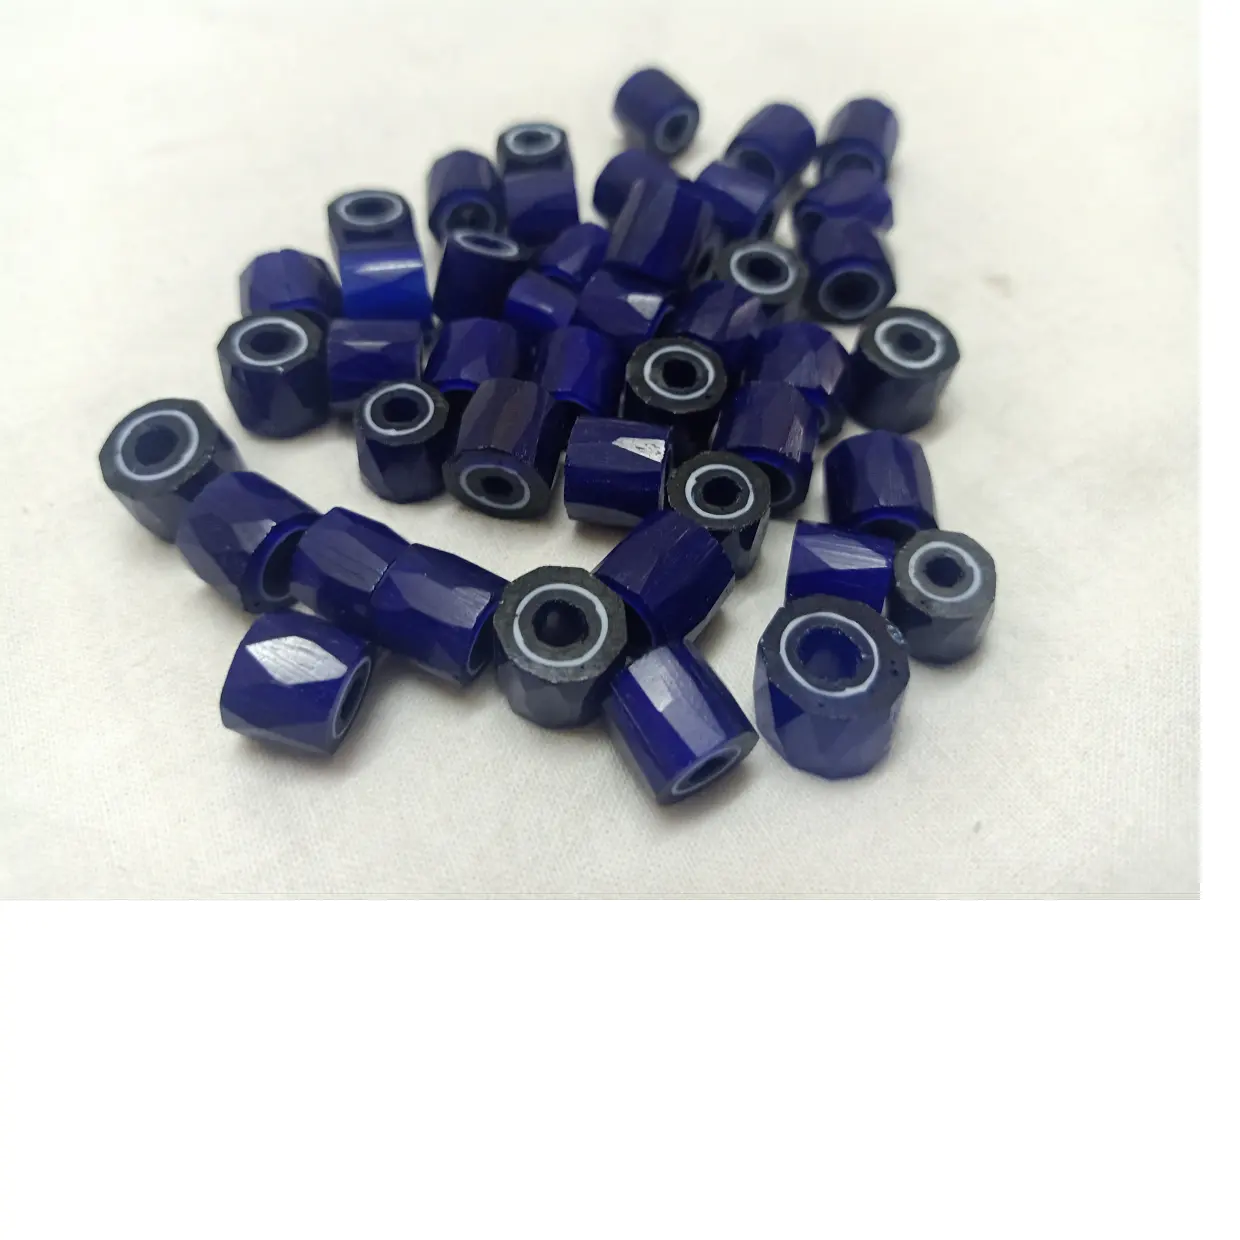 custom made faceted glass beads suitable for jewelry designers and bead stores can be made in your choice of colors